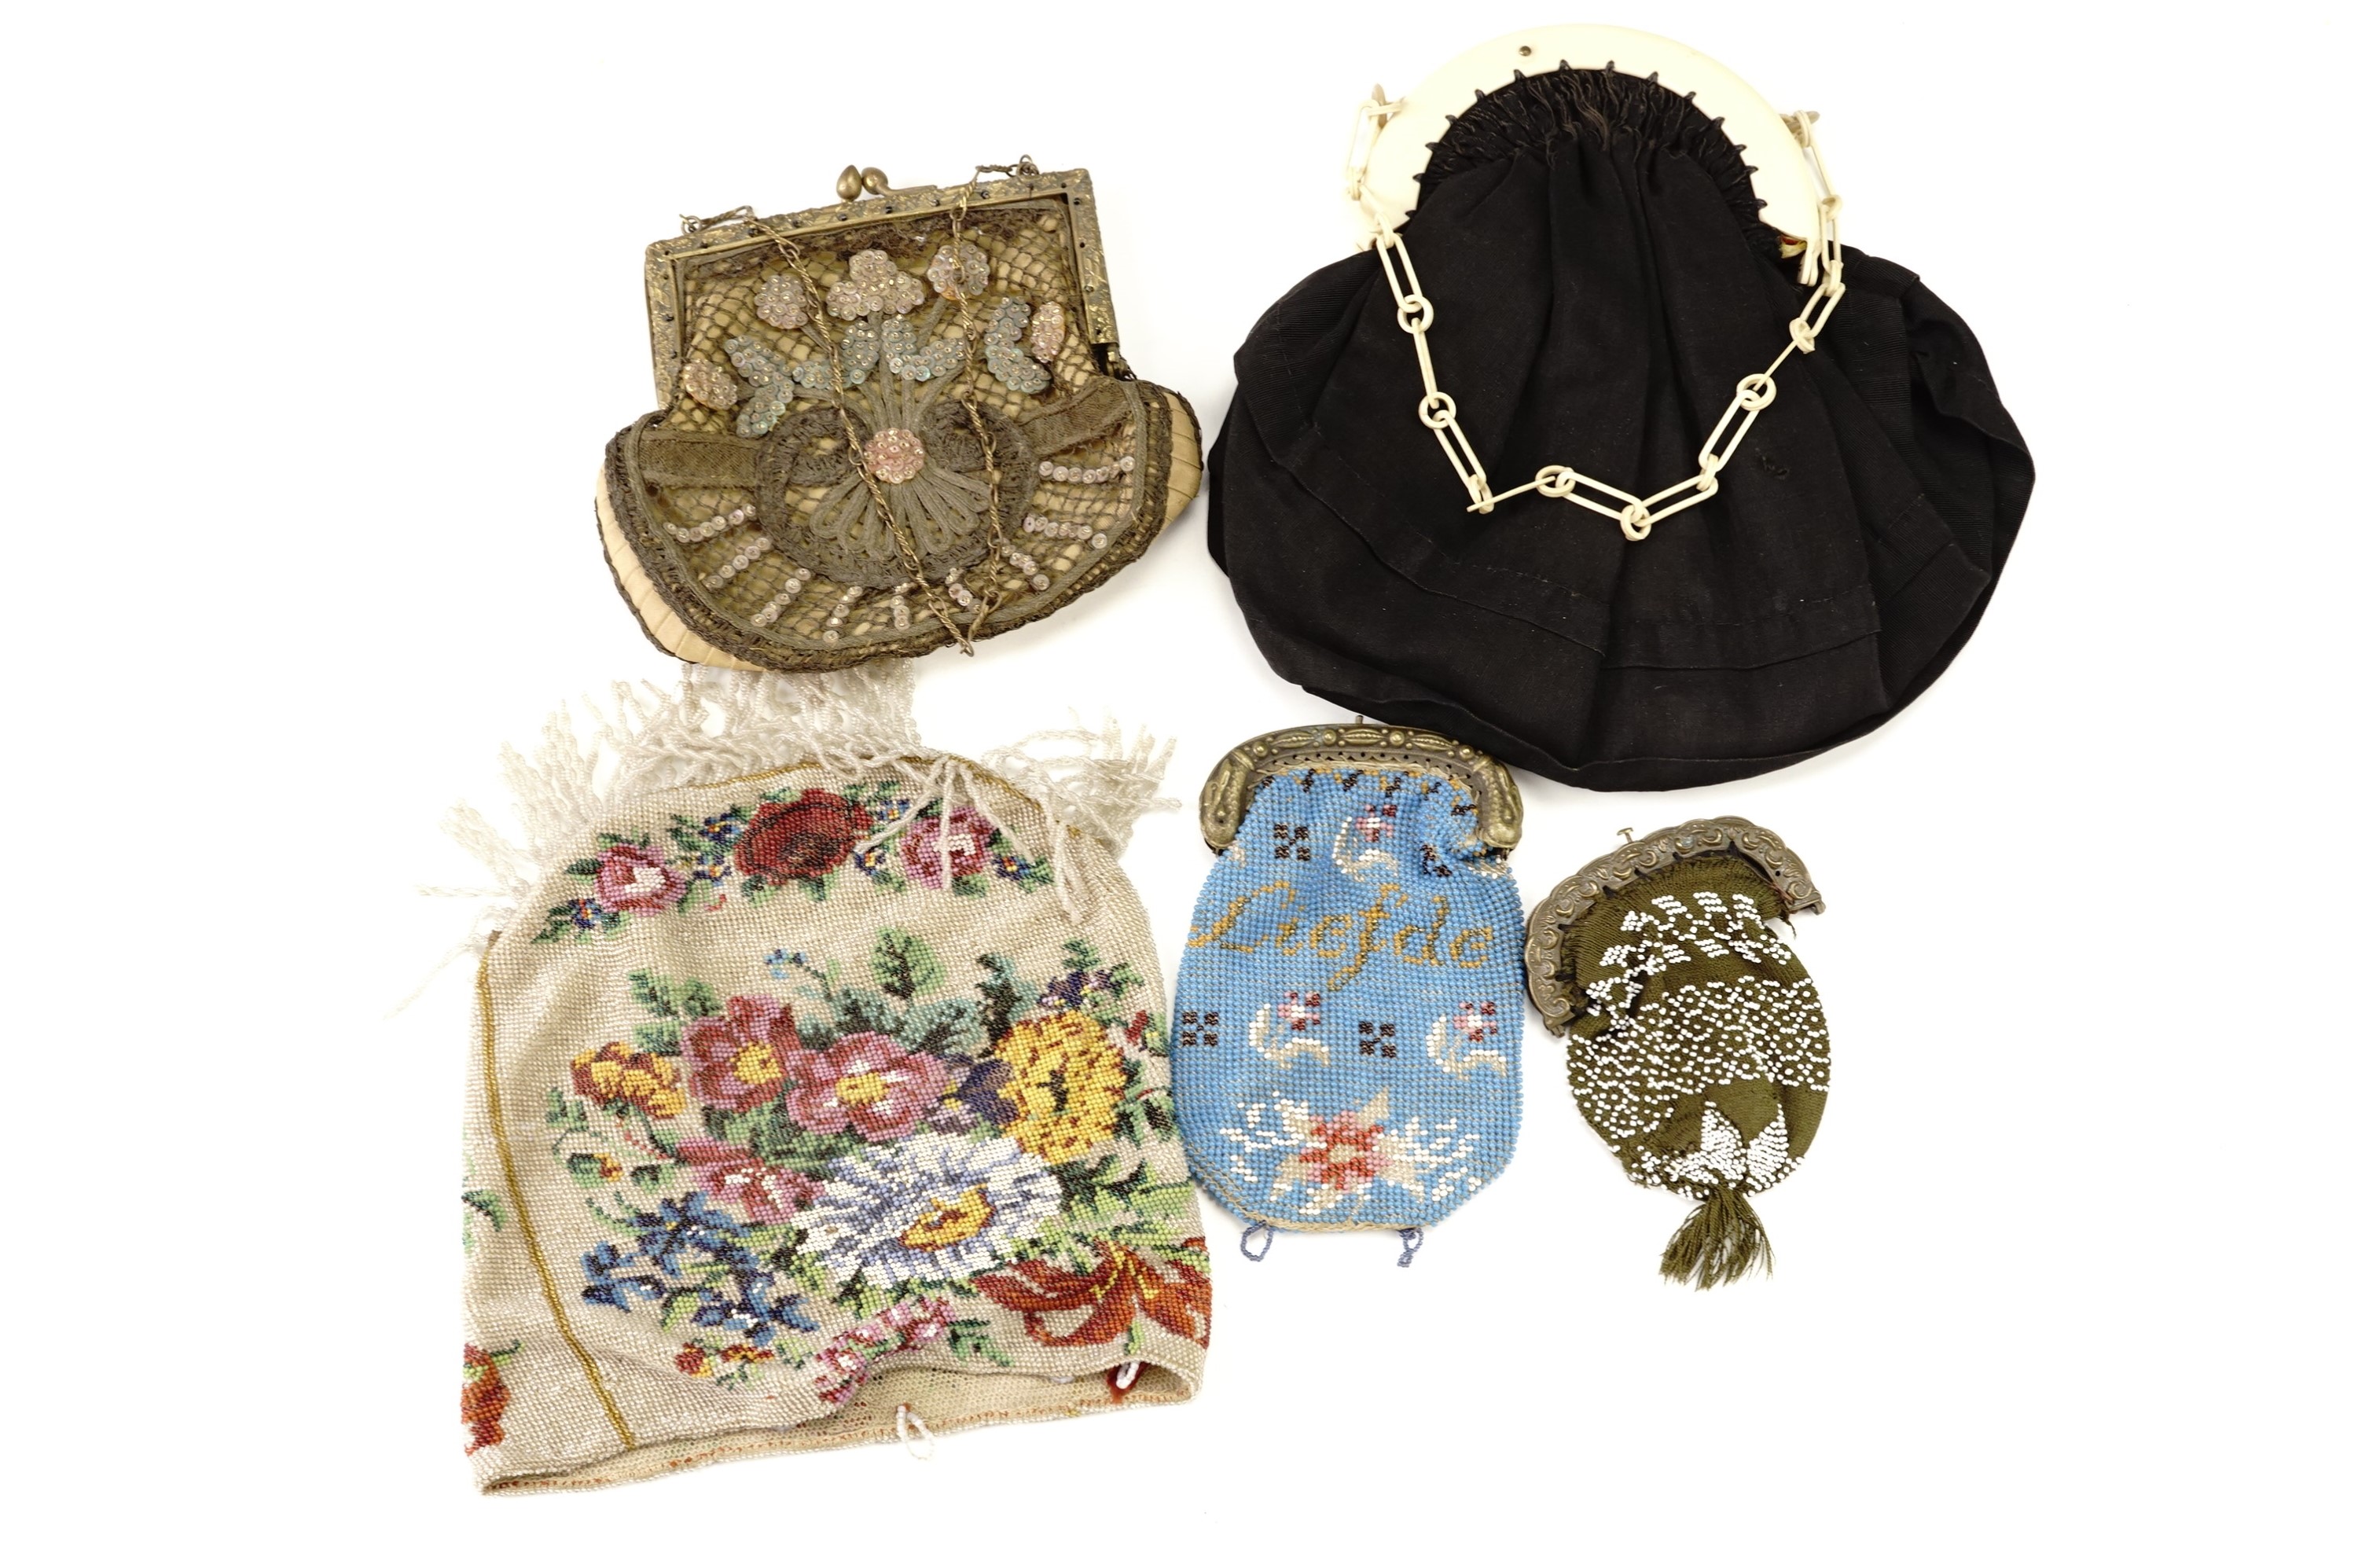 Five vintage ladies' evening bags / purses, 19th Century and later, including glass beadwork